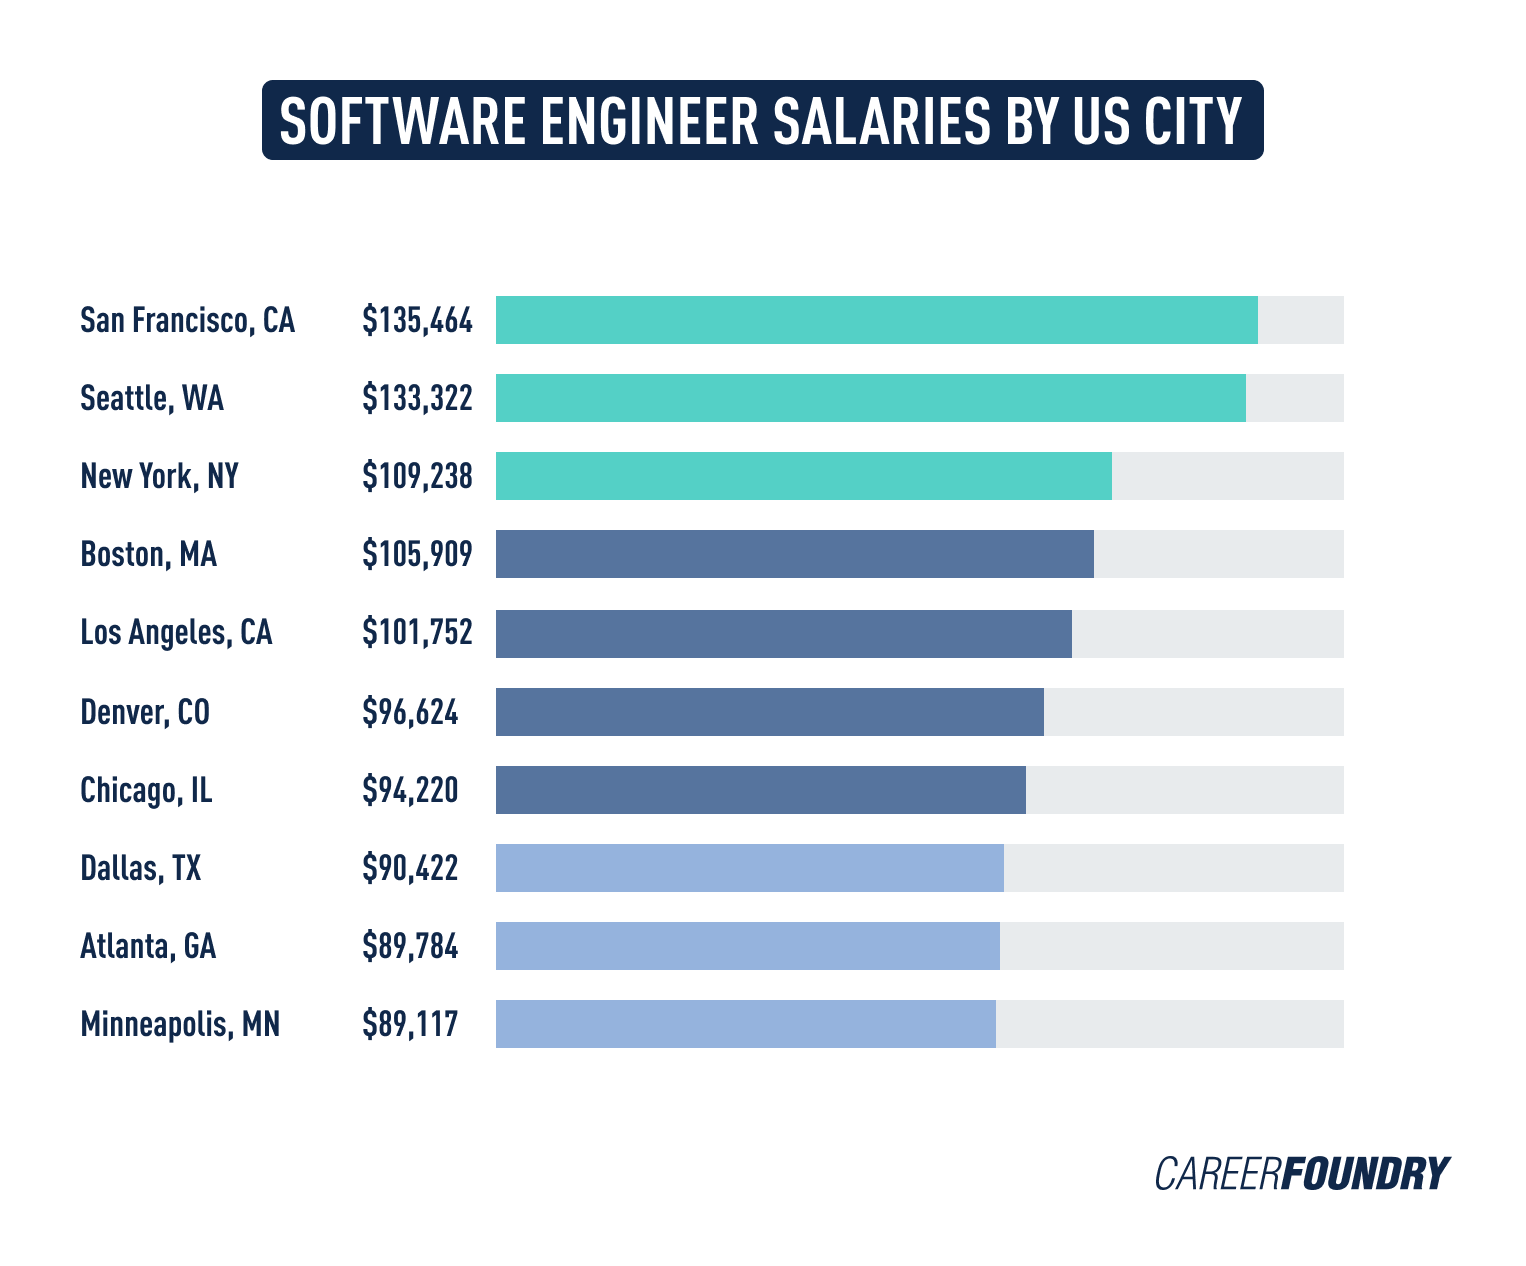 A graph displaying software engineer salaries by major U.S. city.